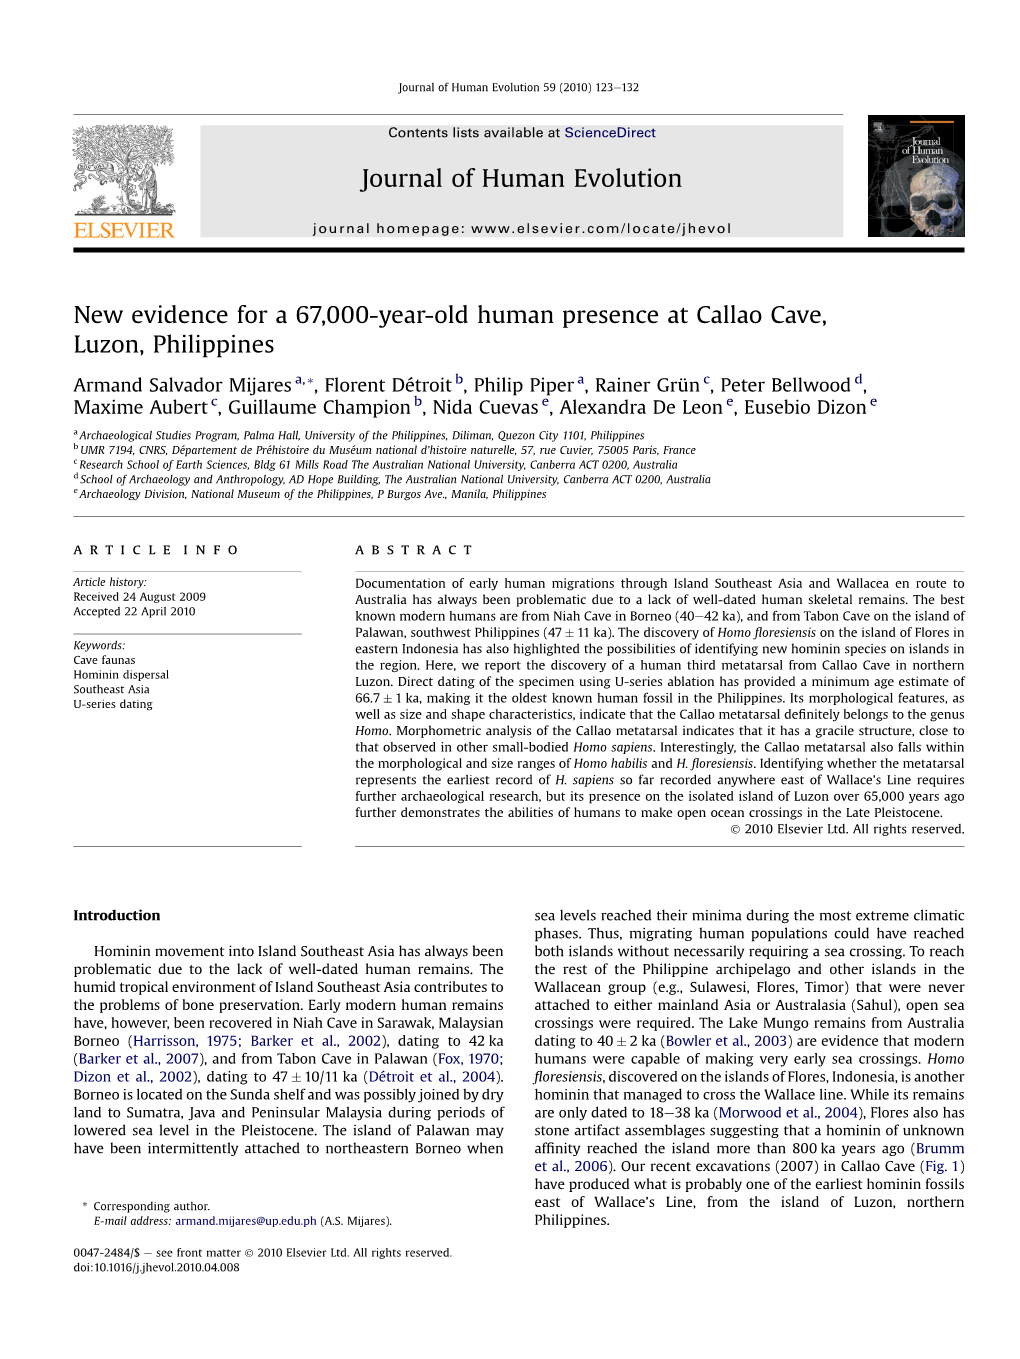 New Evidence for a 67,000-Year-Old Human Presence at Callao Cave, Luzon, Philippines